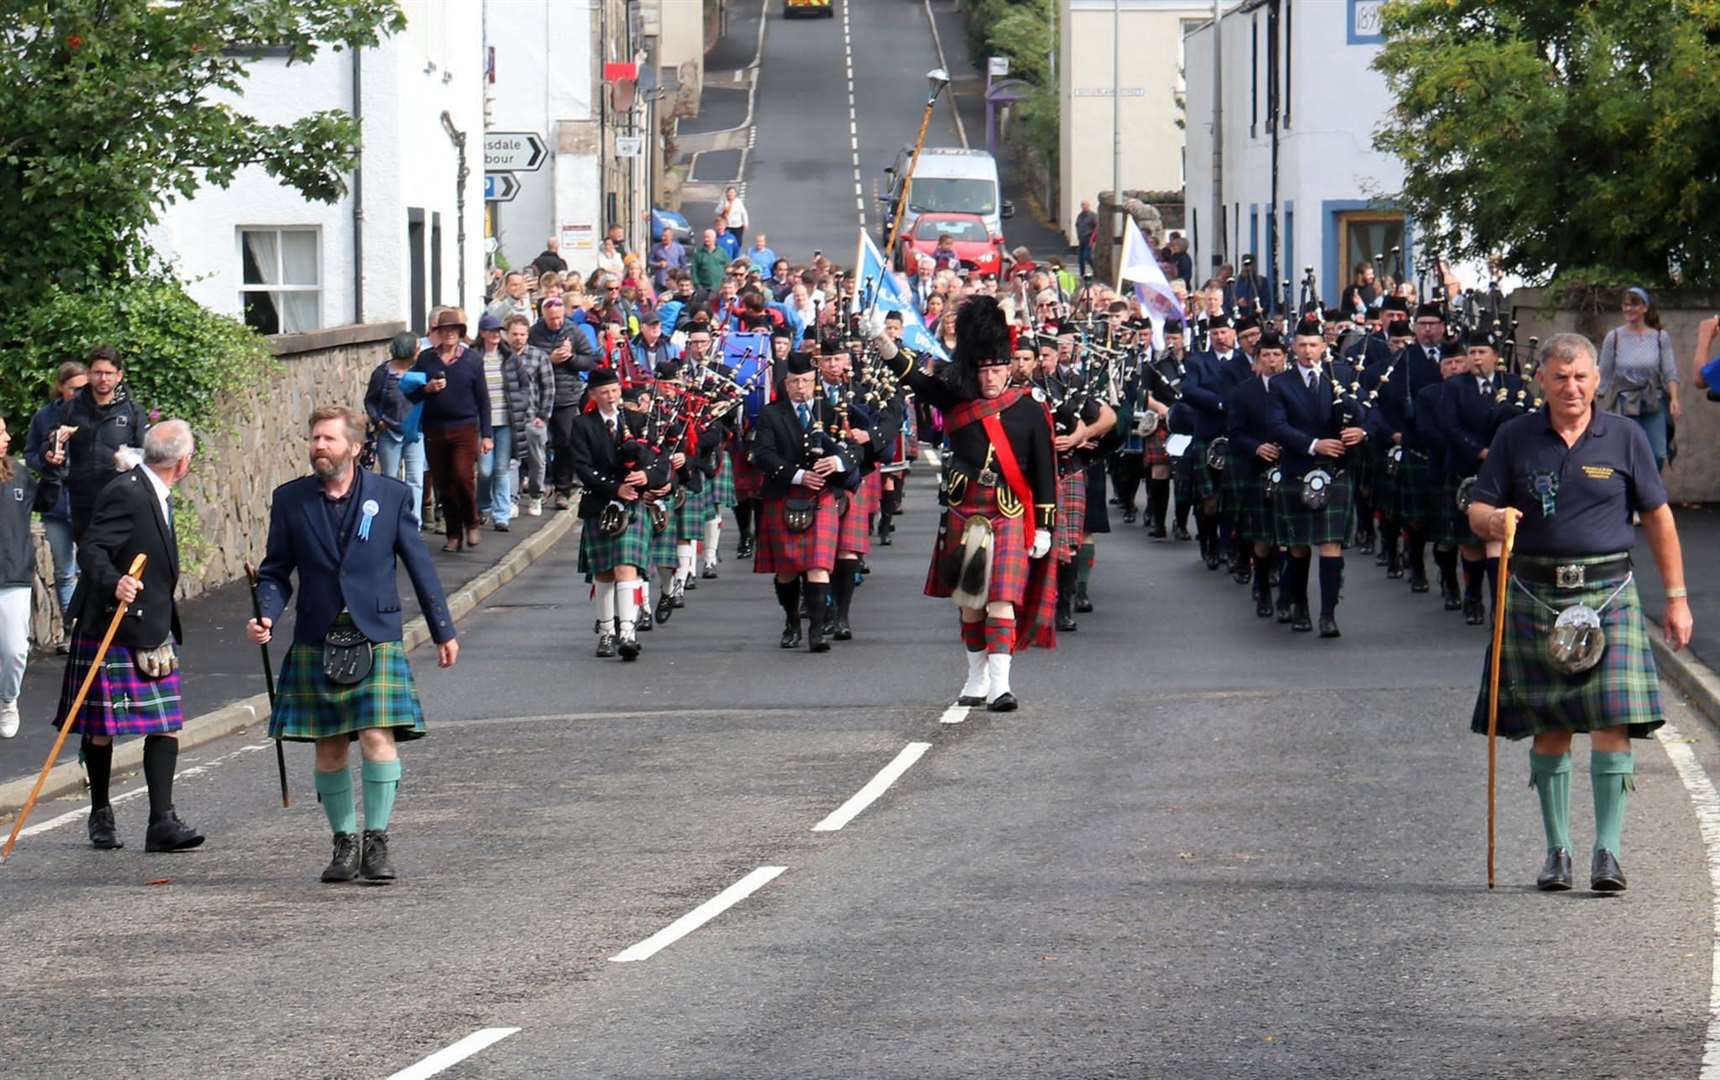 Donnie Ross and Lorna Macrae proudly served as this year’s standard-bearers, leading the parade from the village up to Couper Park, accompanied by the magnificent mass pipe Bands of Thurso, Tain, Sutherland Caledonian and Sutherland Schools.